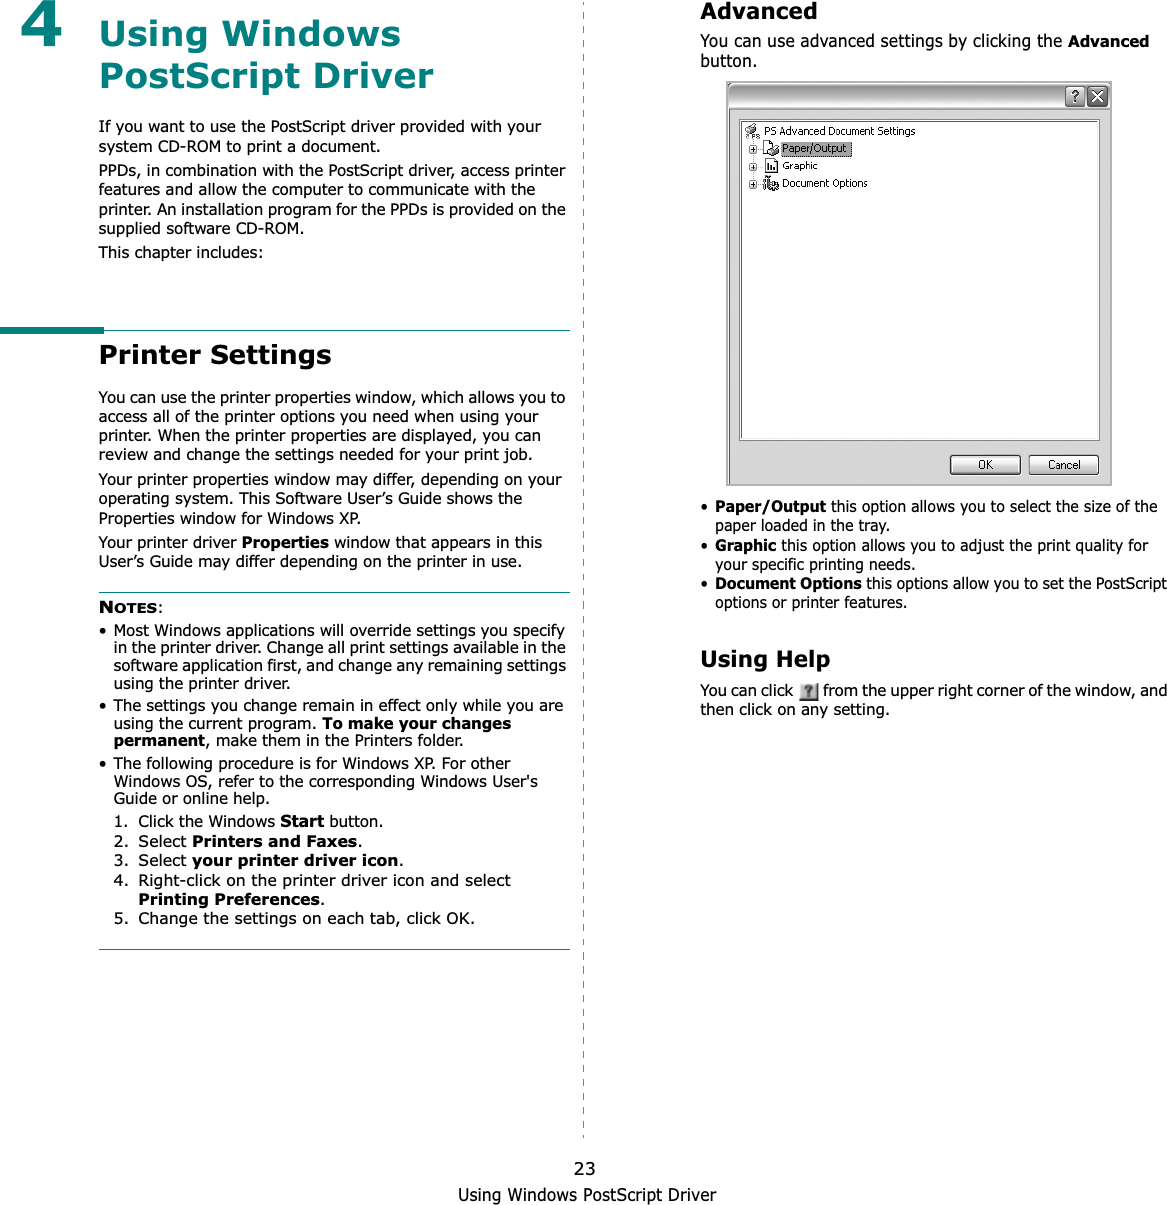 Using Windows PostScript Driver234Using Windows PostScript DriverIf you want to use the PostScript driver provided with your system CD-ROM to print a document.PPDs, in combination with the PostScript driver, access printer features and allow the computer to communicate with the printer. An installation program for the PPDs is provided on the supplied software CD-ROM. This chapter includes:Printer SettingsYou can use the printer properties window, which allows you to access all of the printer options you need when using your printer. When the printer properties are displayed, you can review and change the settings needed for your print job. Your printer properties window may differ, depending on your operating system. This Software User’s Guide shows the Properties window for Windows XP.Your printer driver Properties window that appears in this User’s Guide may differ depending on the printer in use.NOTES:• Most Windows applications will override settings you specify in the printer driver. Change all print settings available in the software application first, and change any remaining settings using the printer driver. • The settings you change remain in effect only while you are using the current program. To make your changes permanent, make them in the Printers folder. • The following procedure is for Windows XP. For other Windows OS, refer to the corresponding Windows User&apos;s Guide or online help.1. Click the Windows Start button.2. Select Printers and Faxes.3. Select your printer driver icon.4. Right-click on the printer driver icon and select Printing Preferences.5. Change the settings on each tab, click OK.AdvancedYou can use advanced settings by clicking the Advancedbutton.•Paper/Output this option allows you to select the size of the paper loaded in the tray.•Graphicthis option allows you to adjust the print quality for your specific printing needs.•Document Optionsthis options allow you to set the PostScript options or printer features.Using HelpYou can click   from the upper right corner of the window, and then click on any setting. 